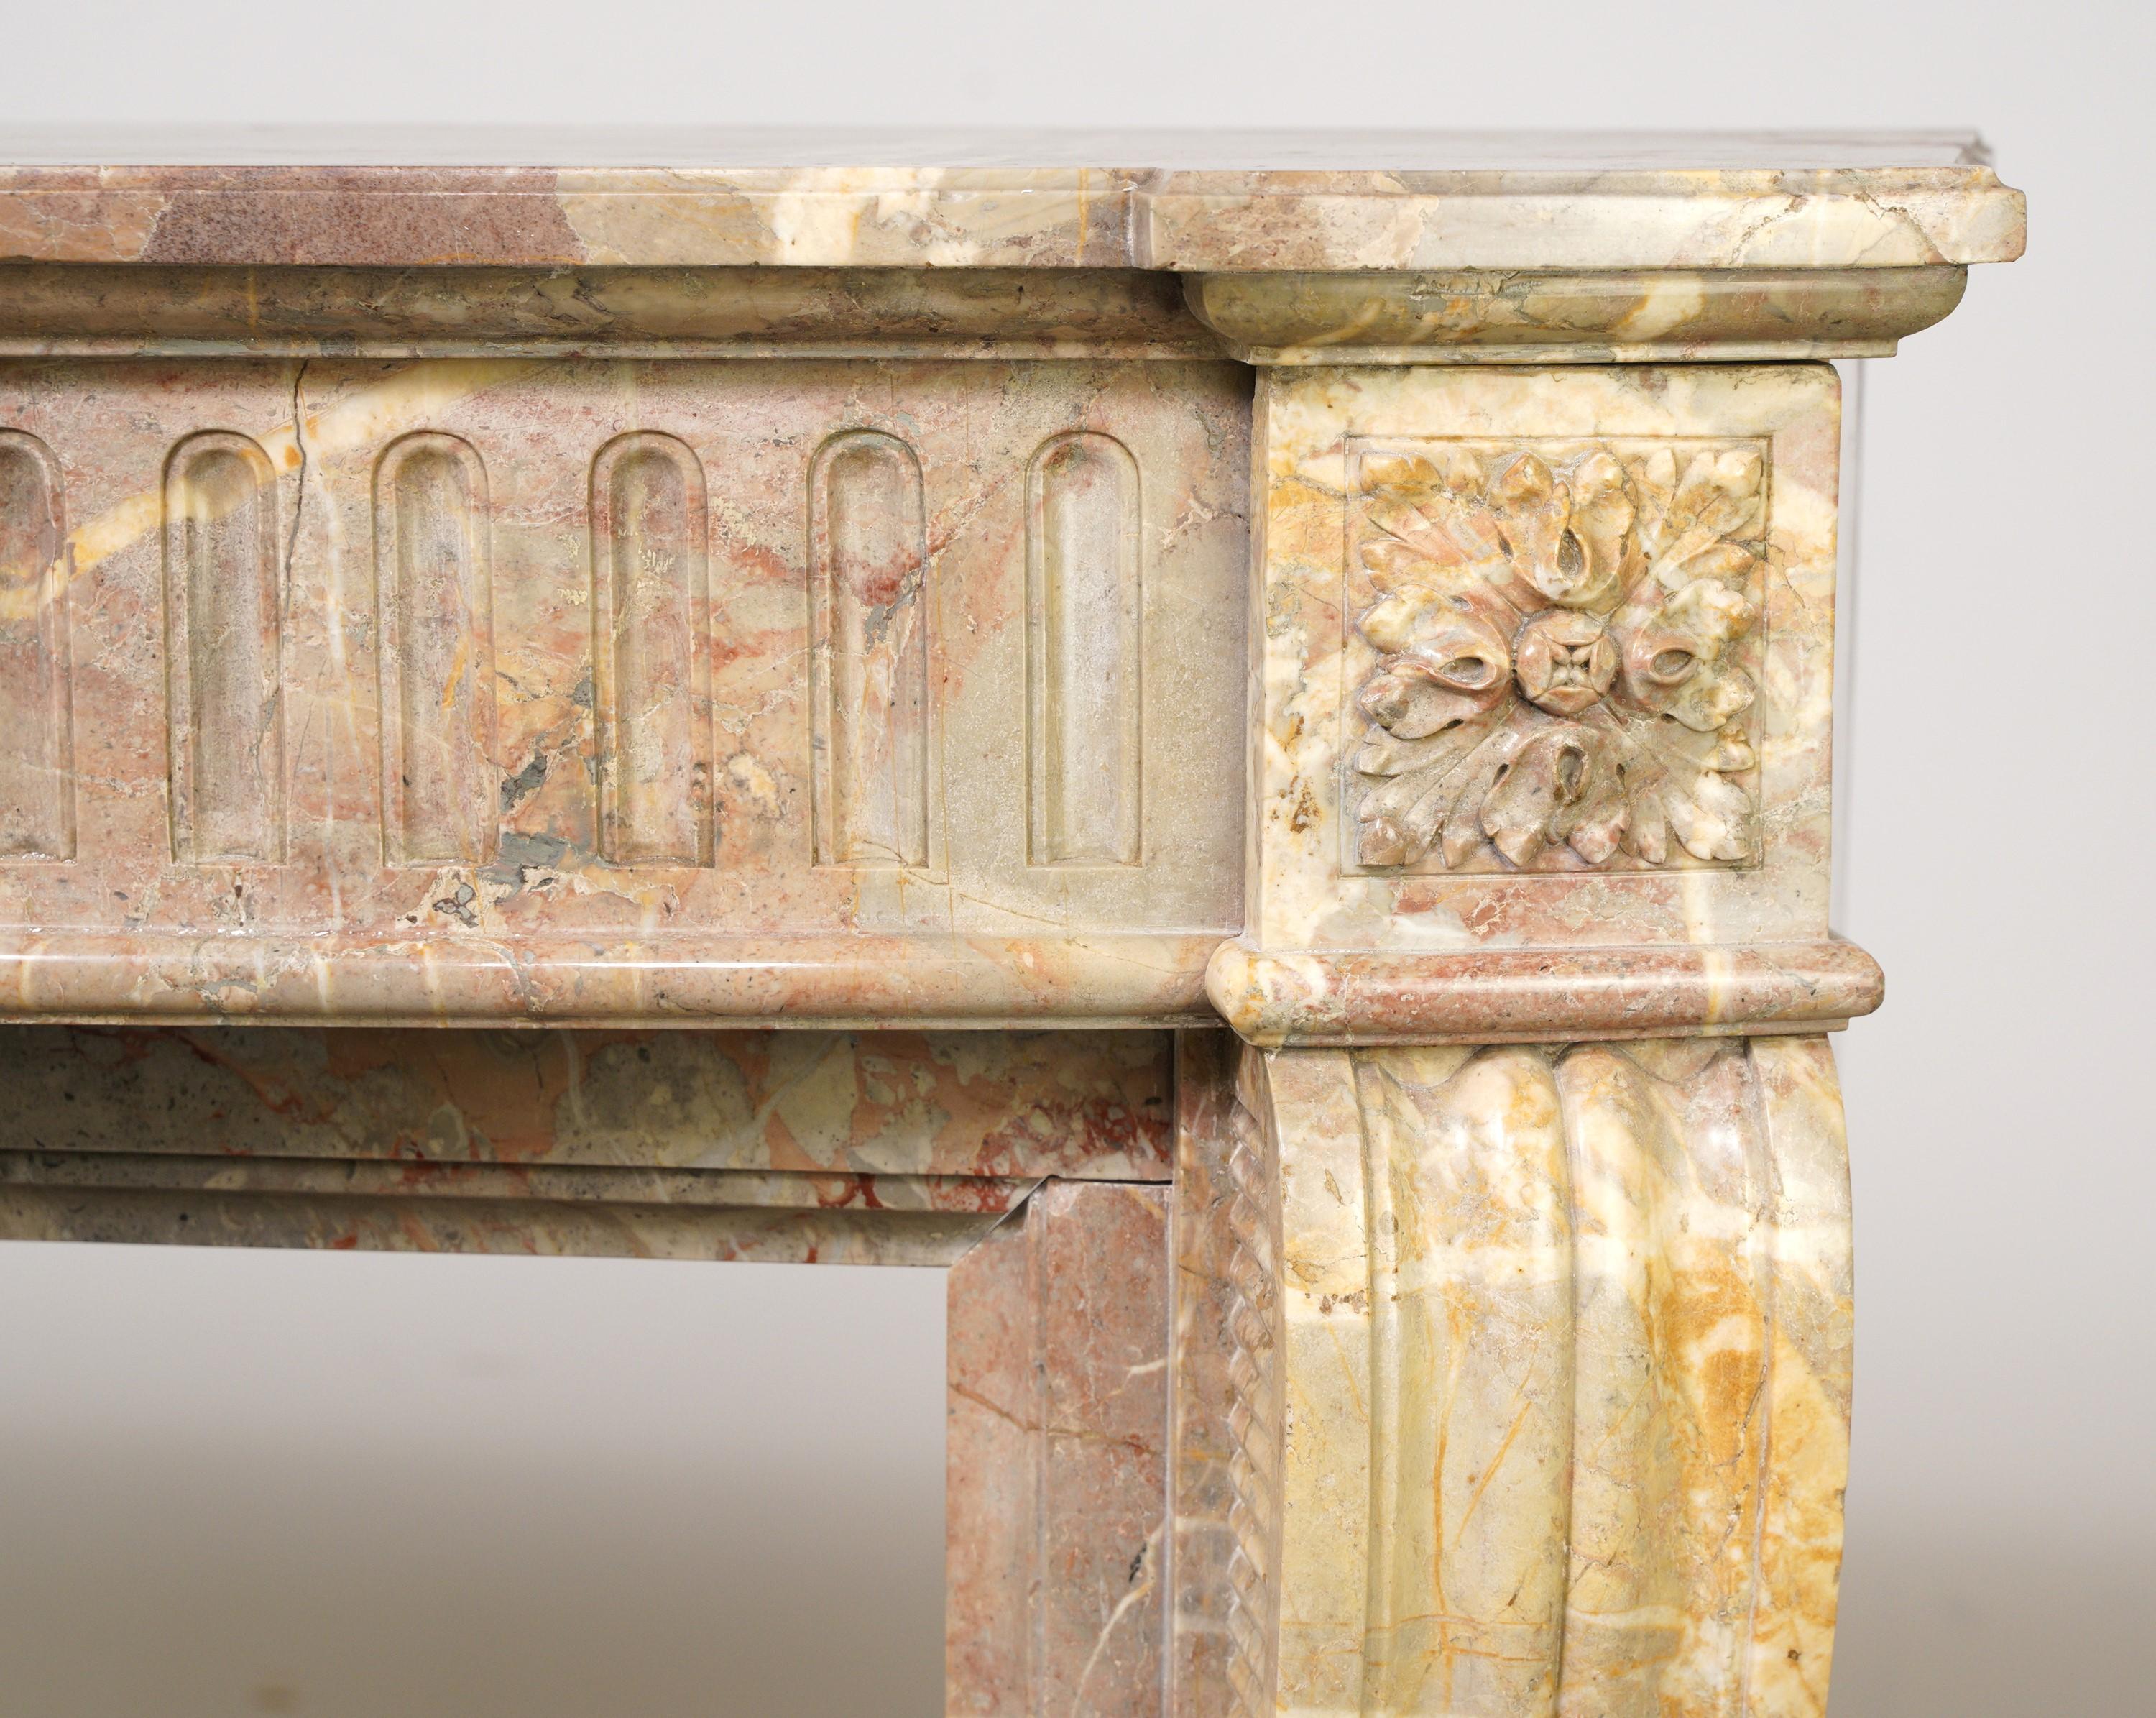 Carved Antique Colorful Breche Regency Marble Mantel 5th Ave NYC at East 66nd St For Sale